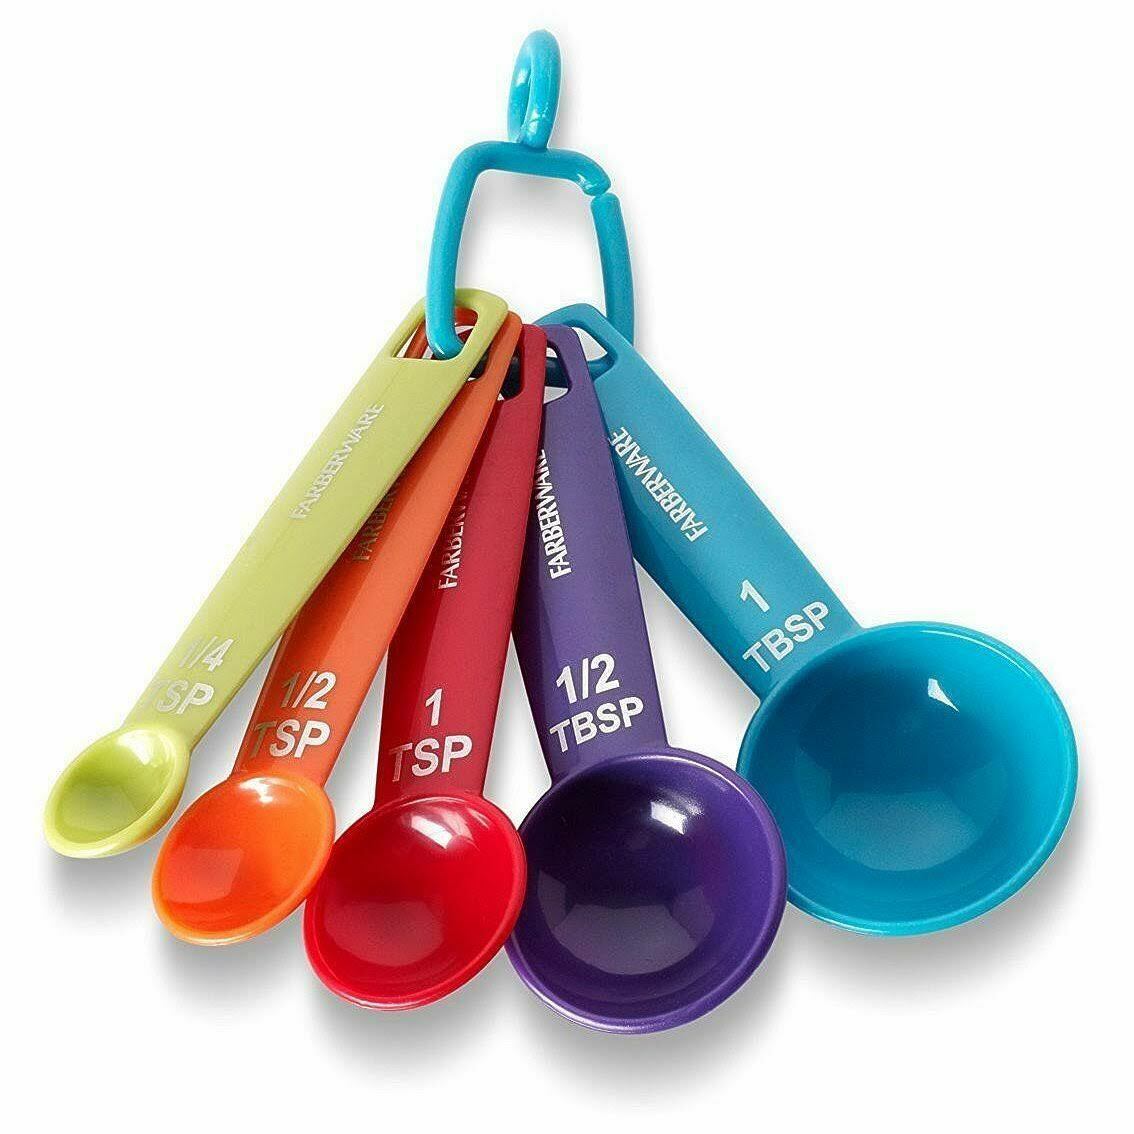 Farberware Color Measuring Spoons, Mixed Colors, Set of 5 - image 2 of 2